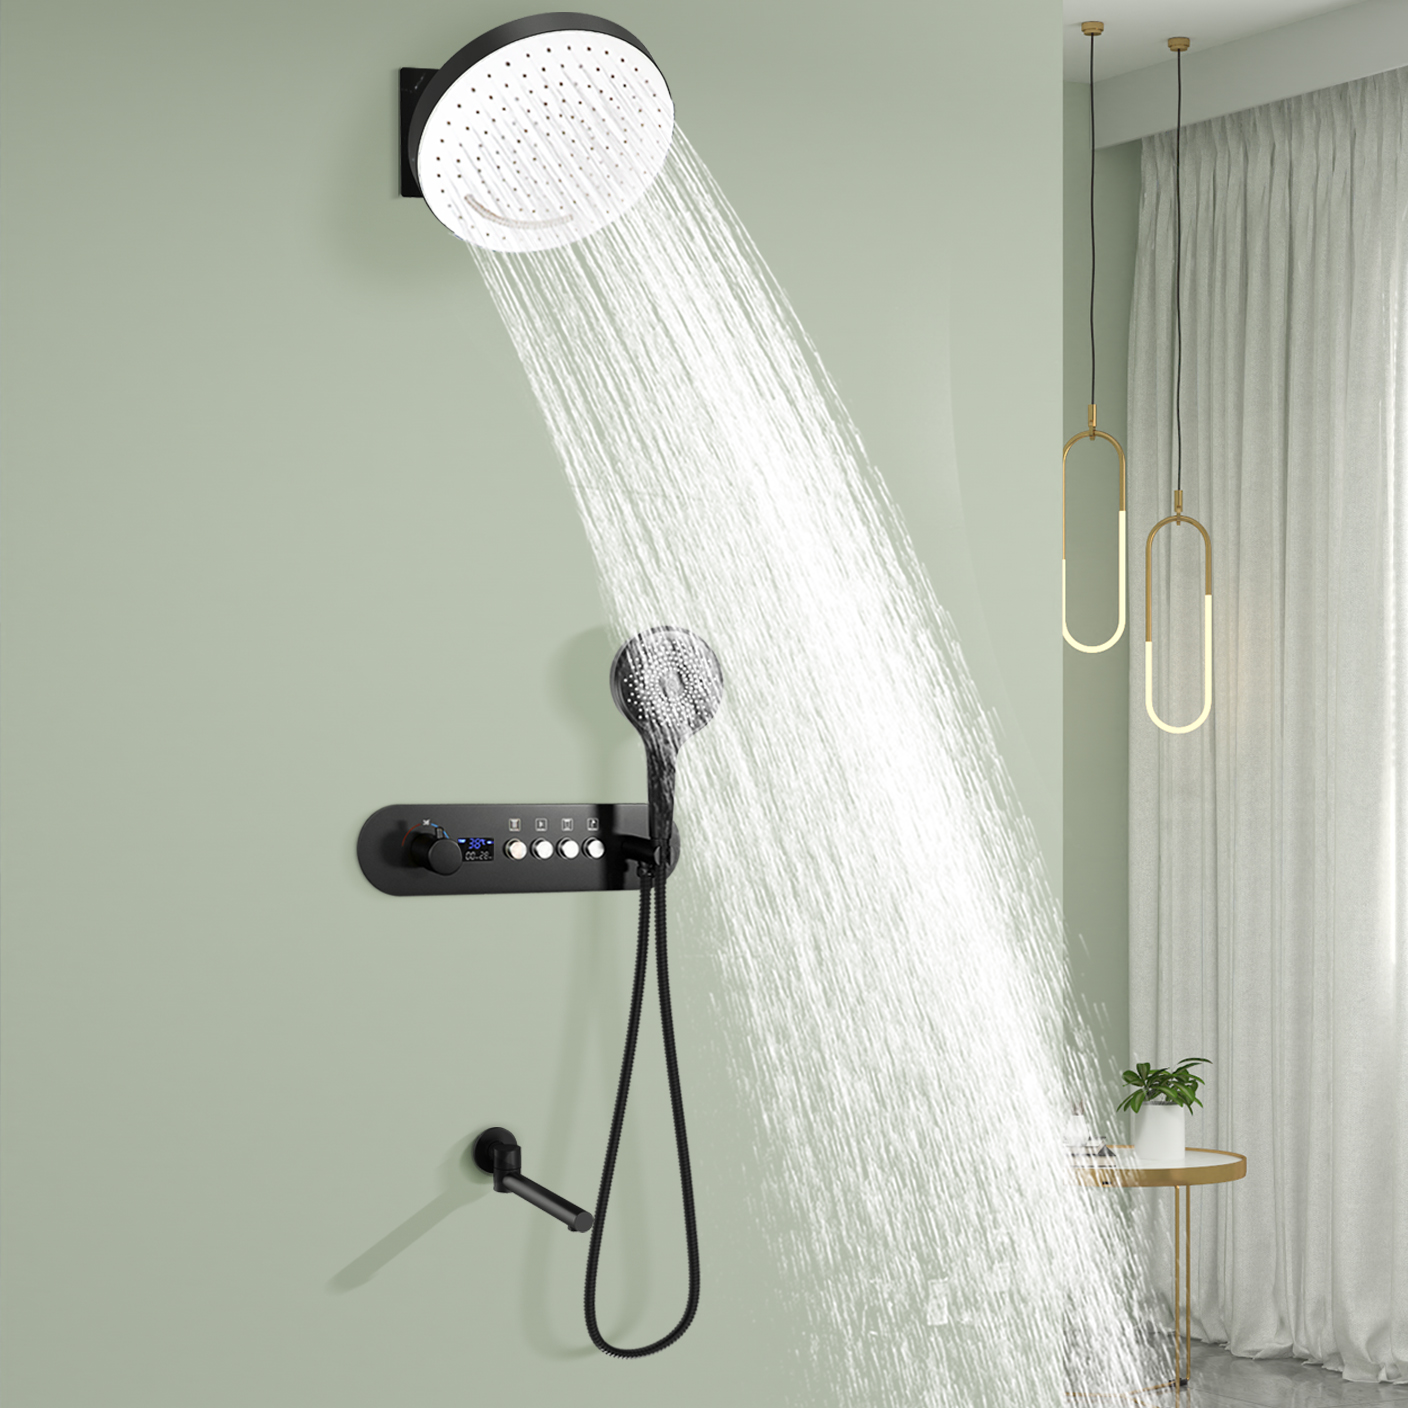 Wall Rainfall, Waterfall Shower System And Water Exit Constant Temperature Shower Mixer